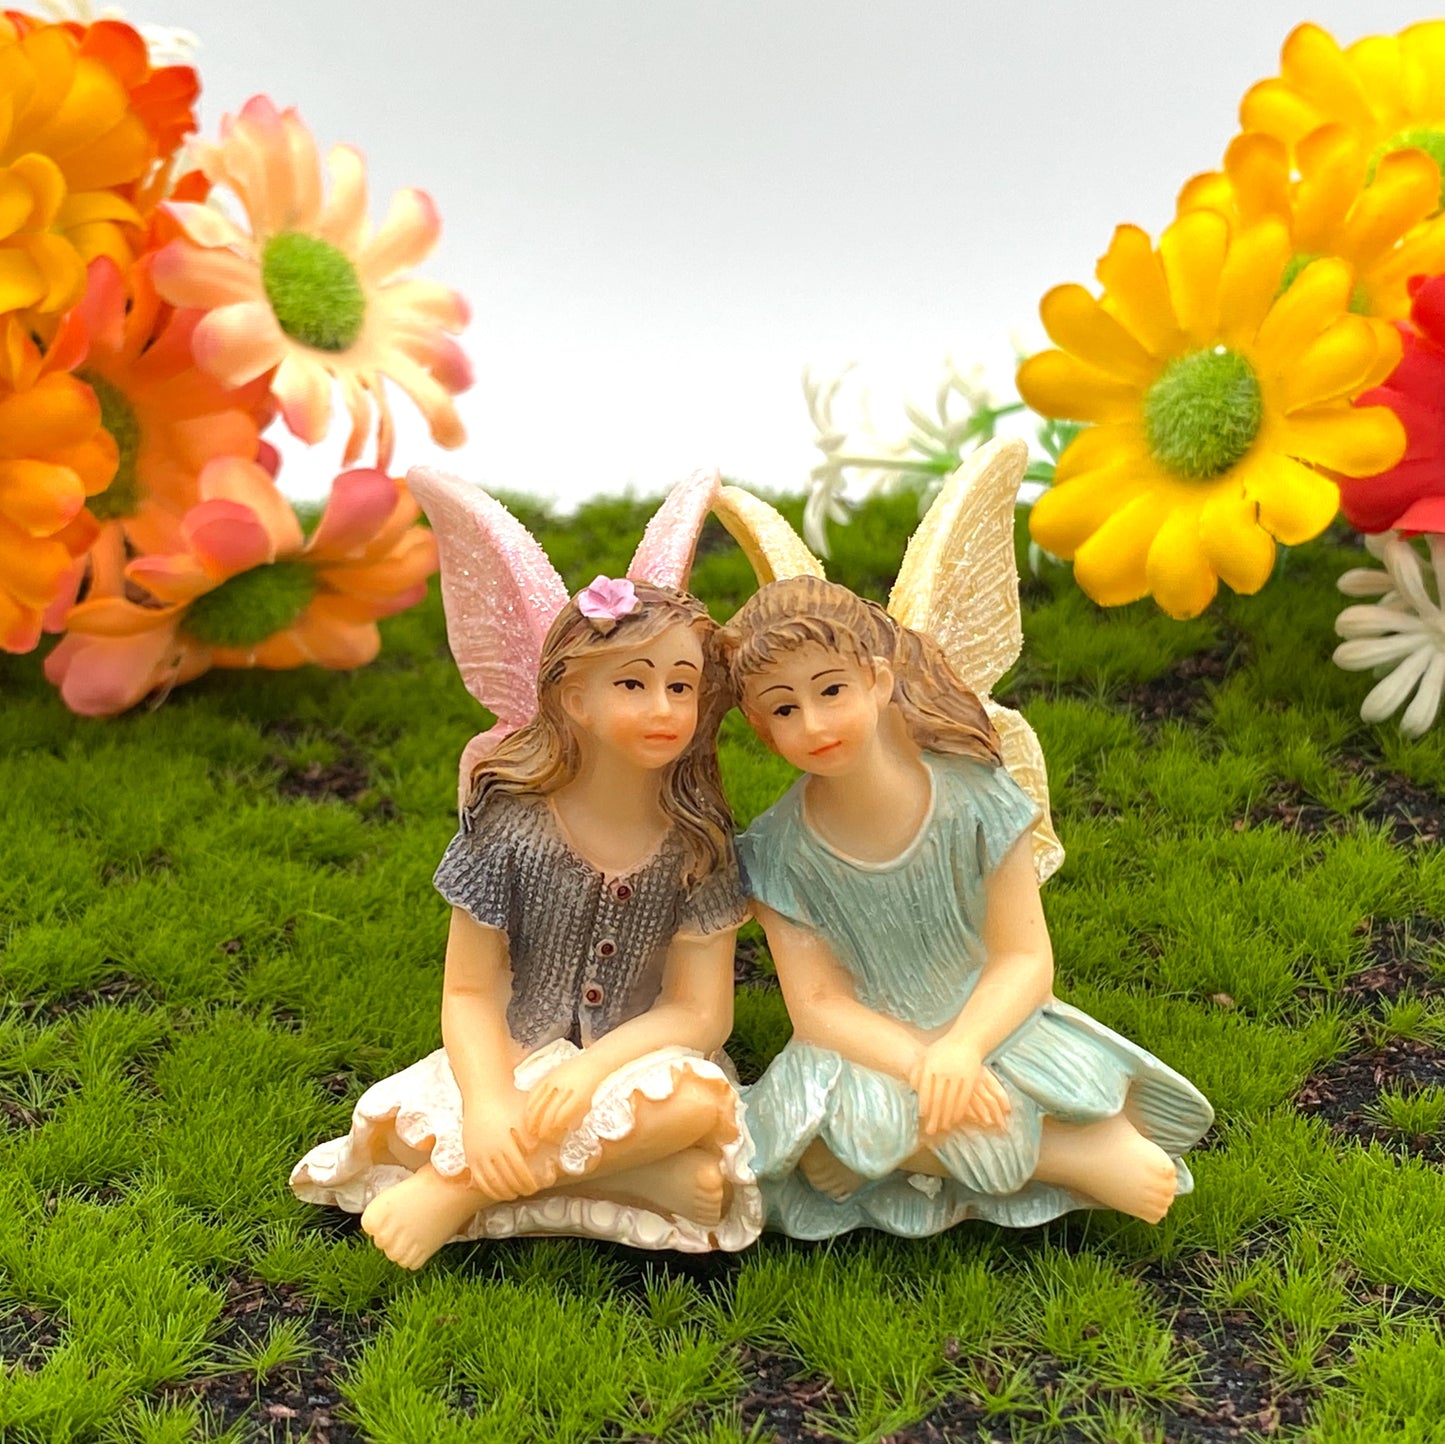 Best friend fairies.  Two girl fairies small figures  side by side 